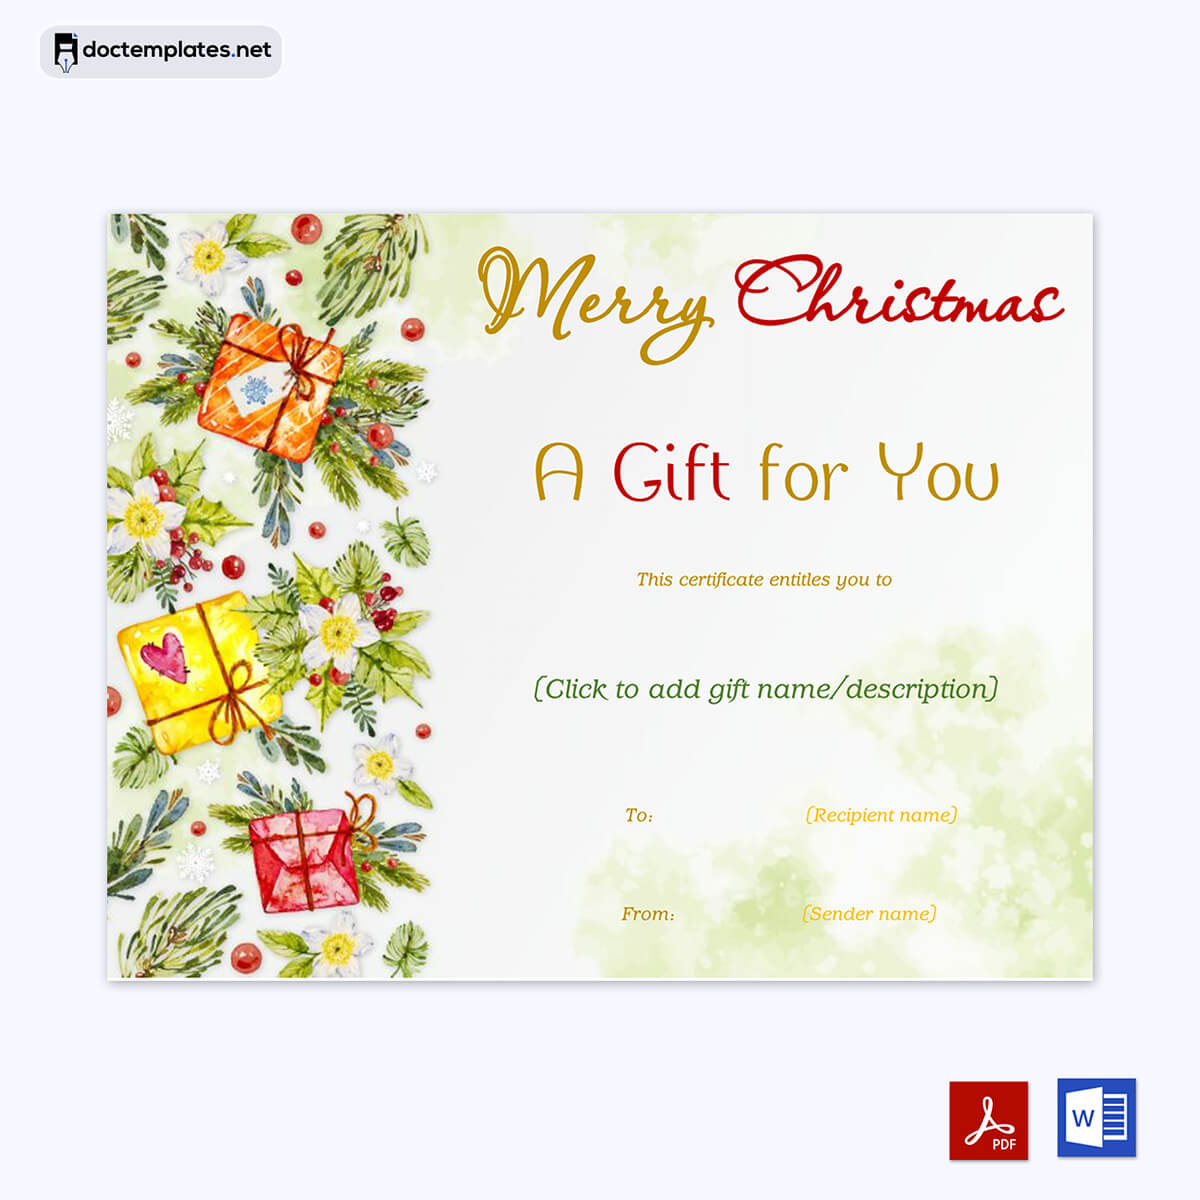 Image of Free holiday voucher template
Free holiday voucher template
03